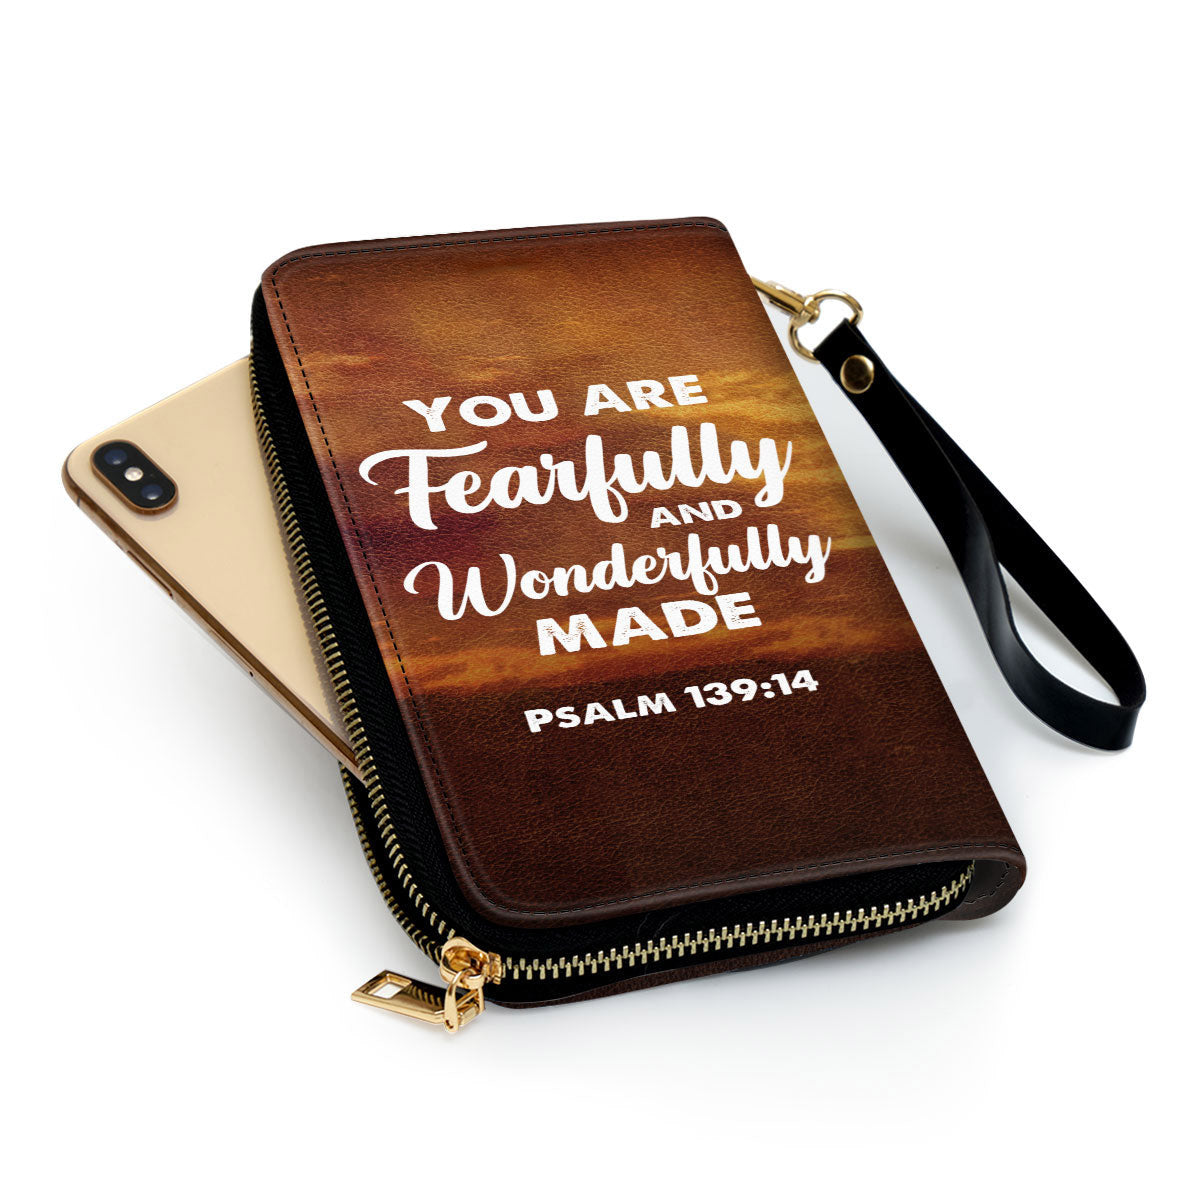 You Are Fearfully And Wonderfully Made Inspirational Gifts For Women Psalm 139 14 Clutch Purse For Women - Personalized Name